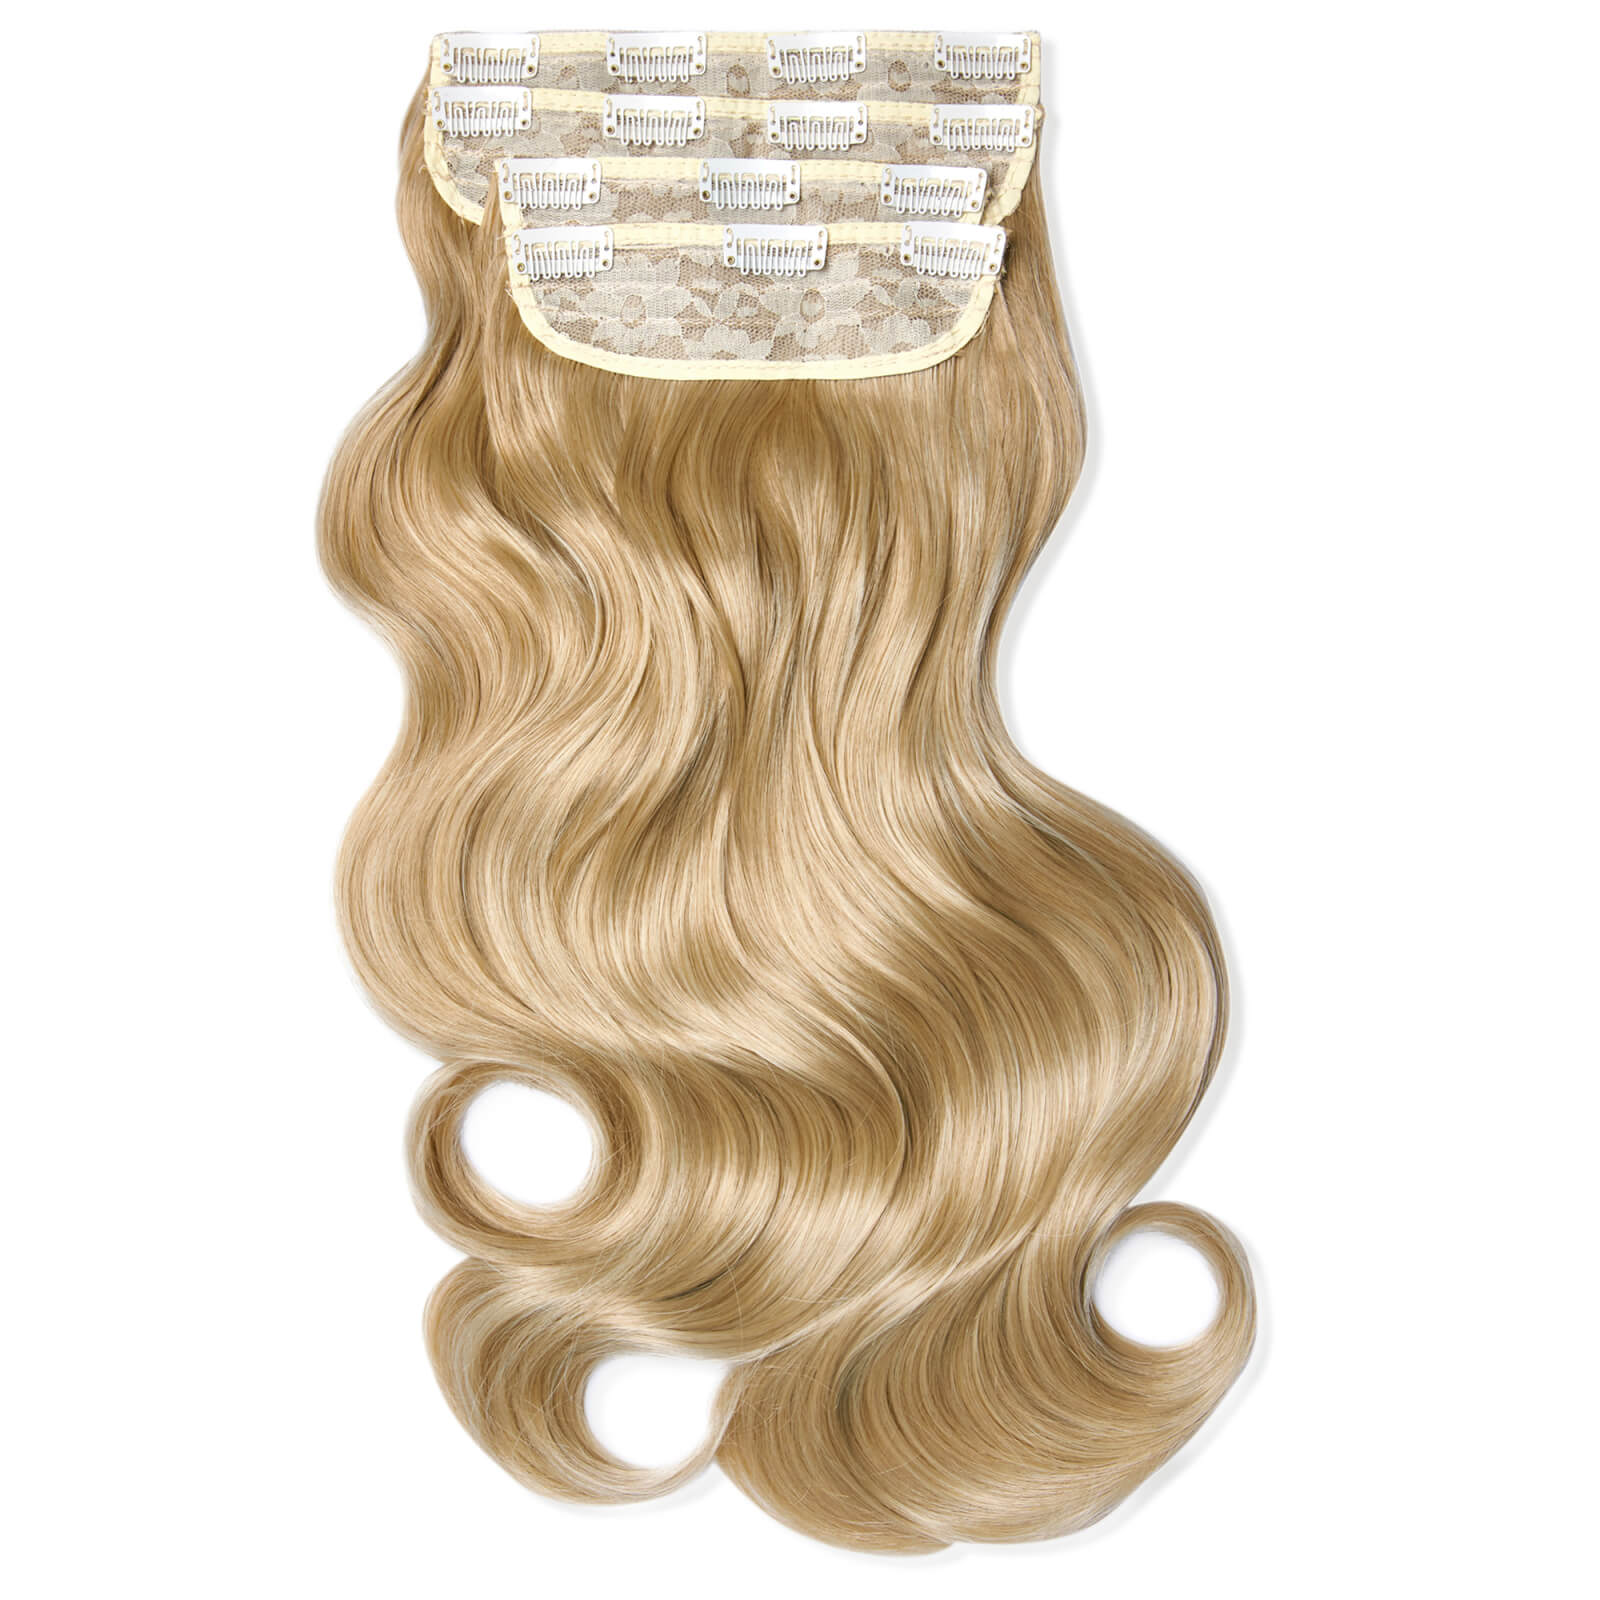 LullaBellz Ultimate Half Up Half Down 22 Inch Curly Extension and Pony Set (Various Shades) - Golden